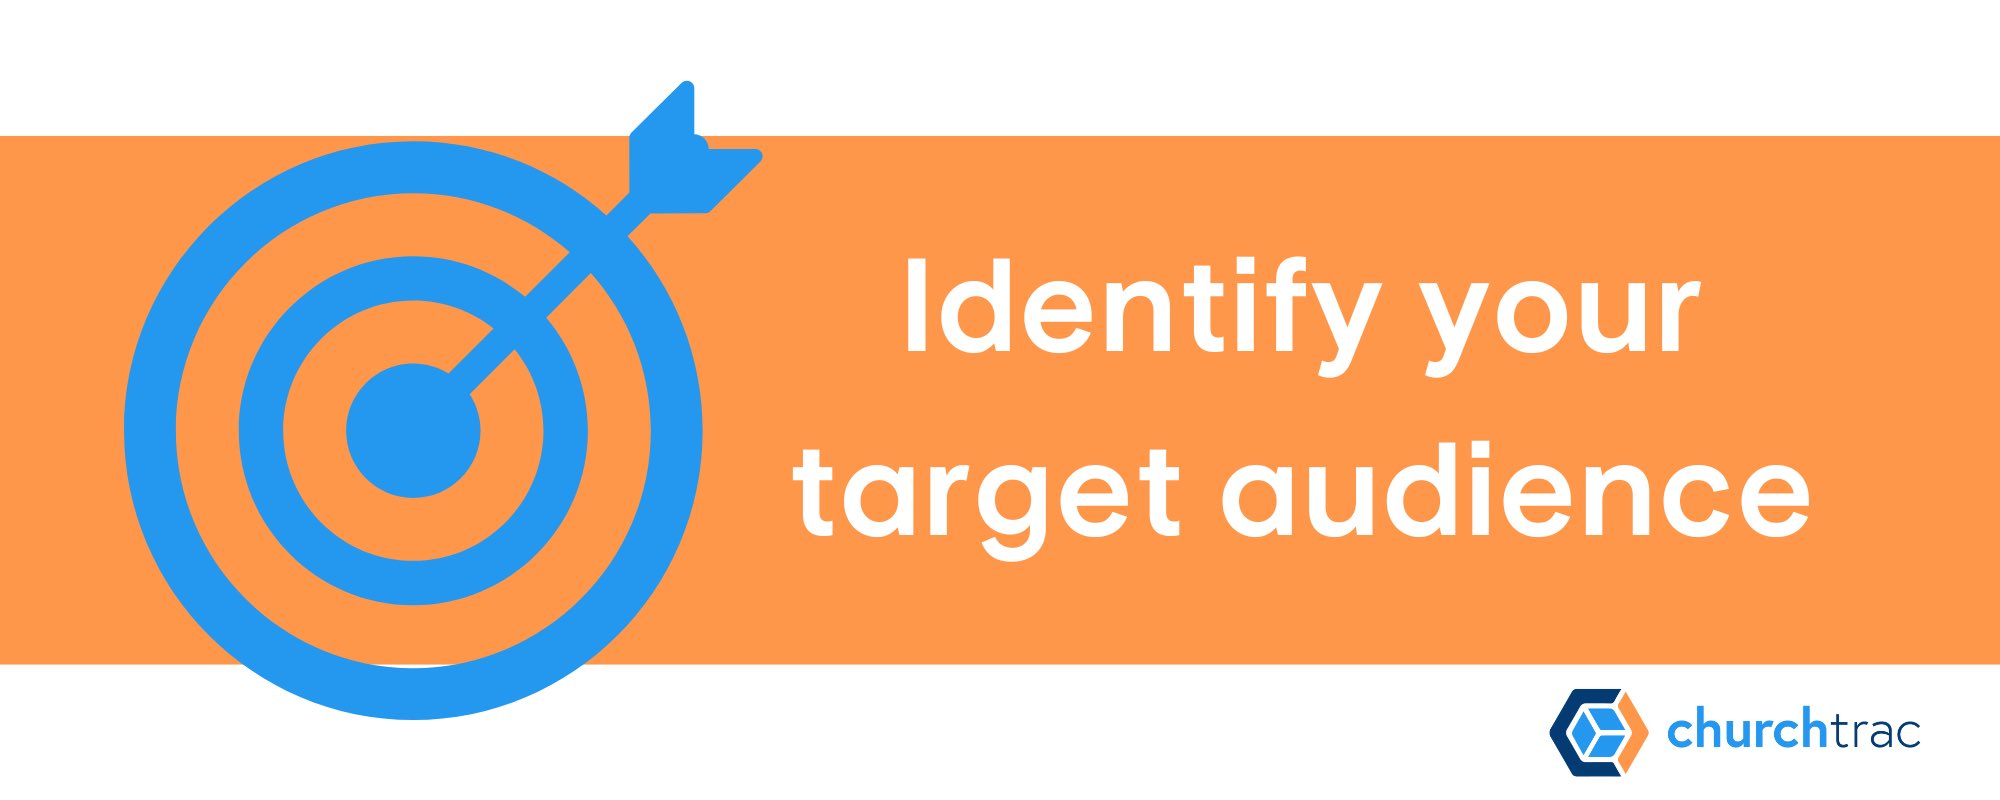 Identify the target audience of your church website